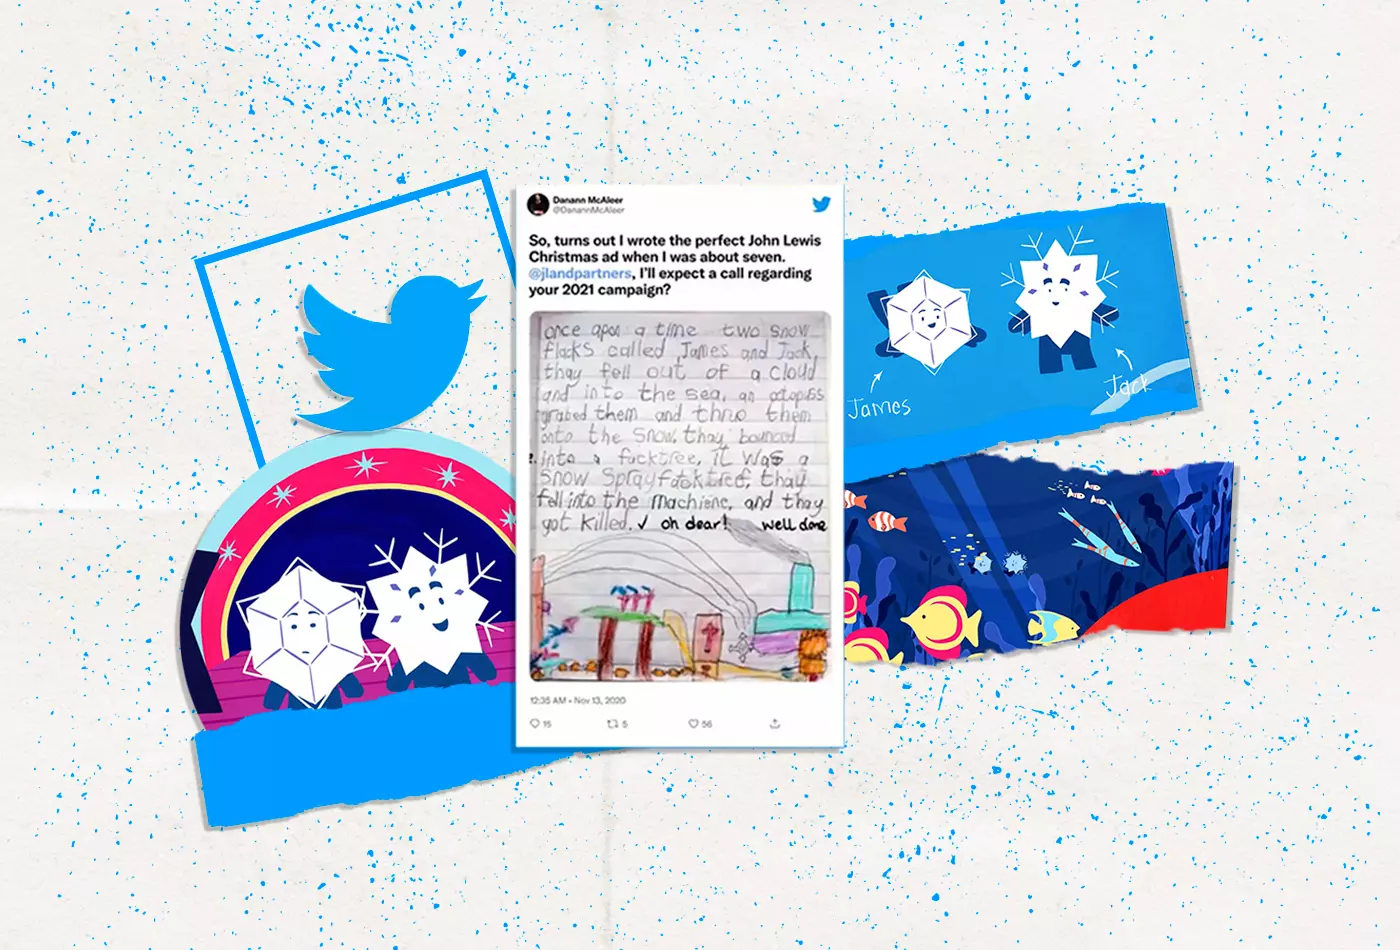 Twitter stories make a perfect Christmas ad